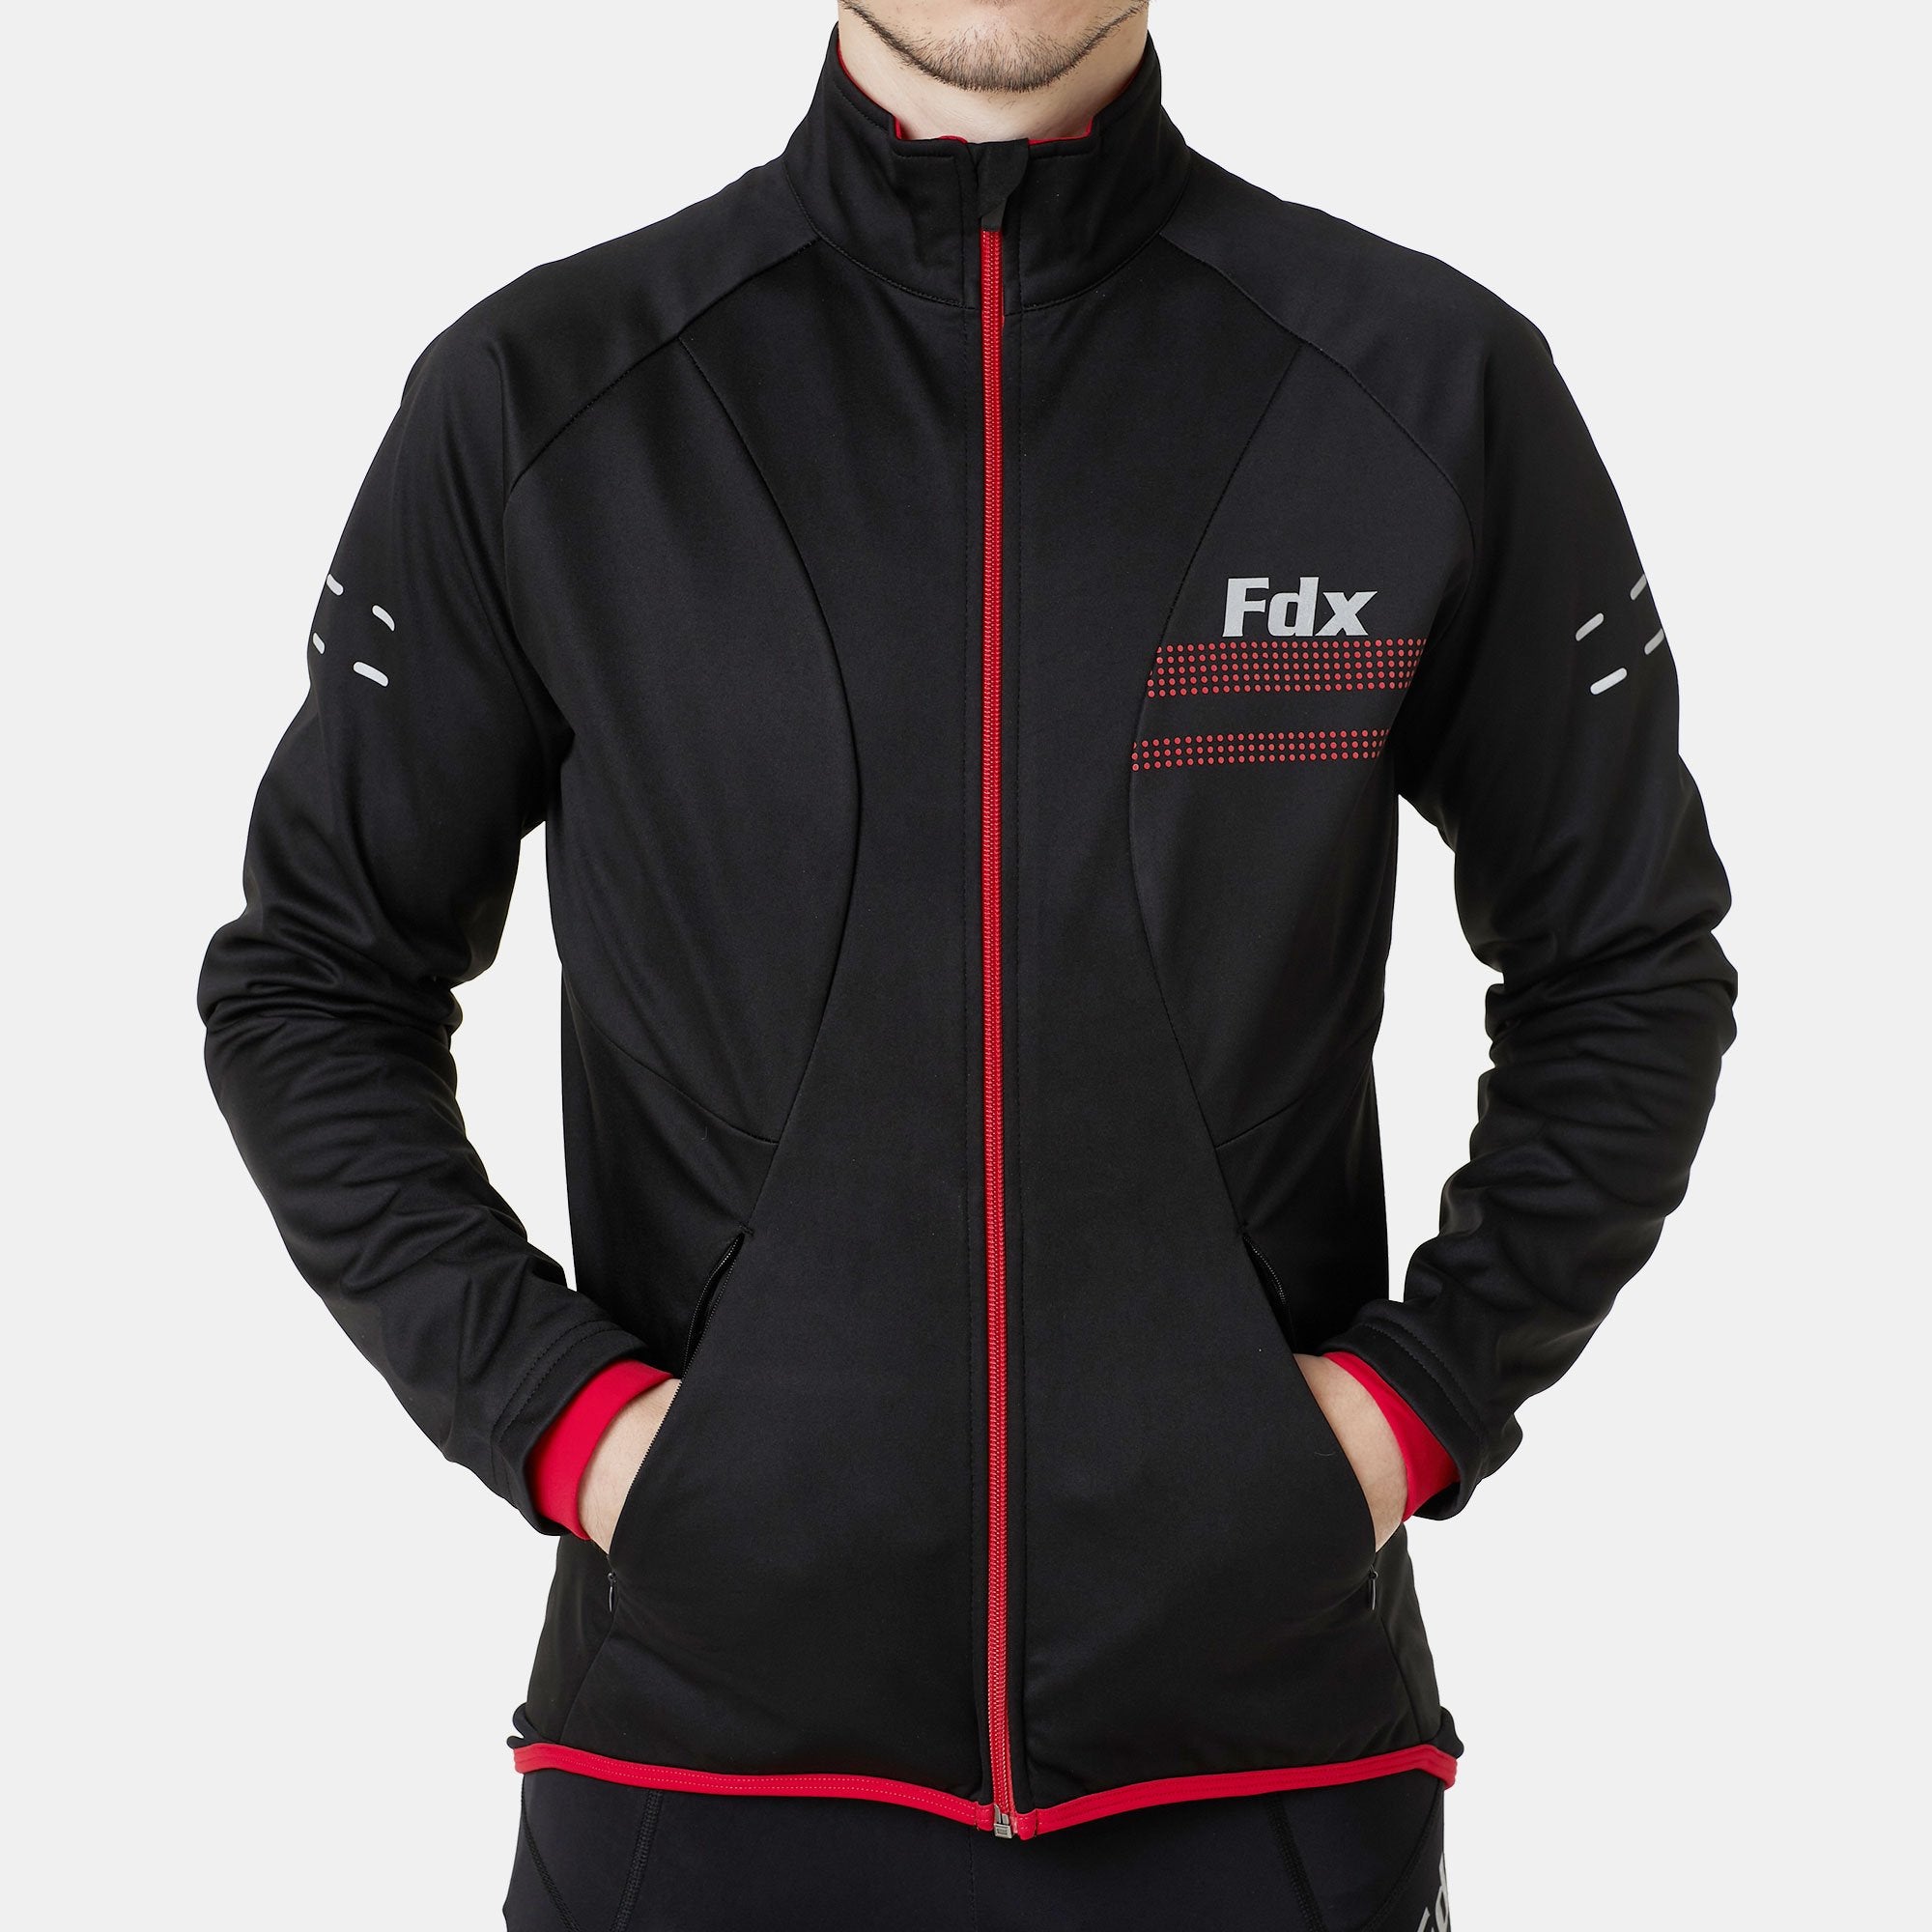 Fdx Arch Men's Red Windproof & Water Resistant Cycling Jacket